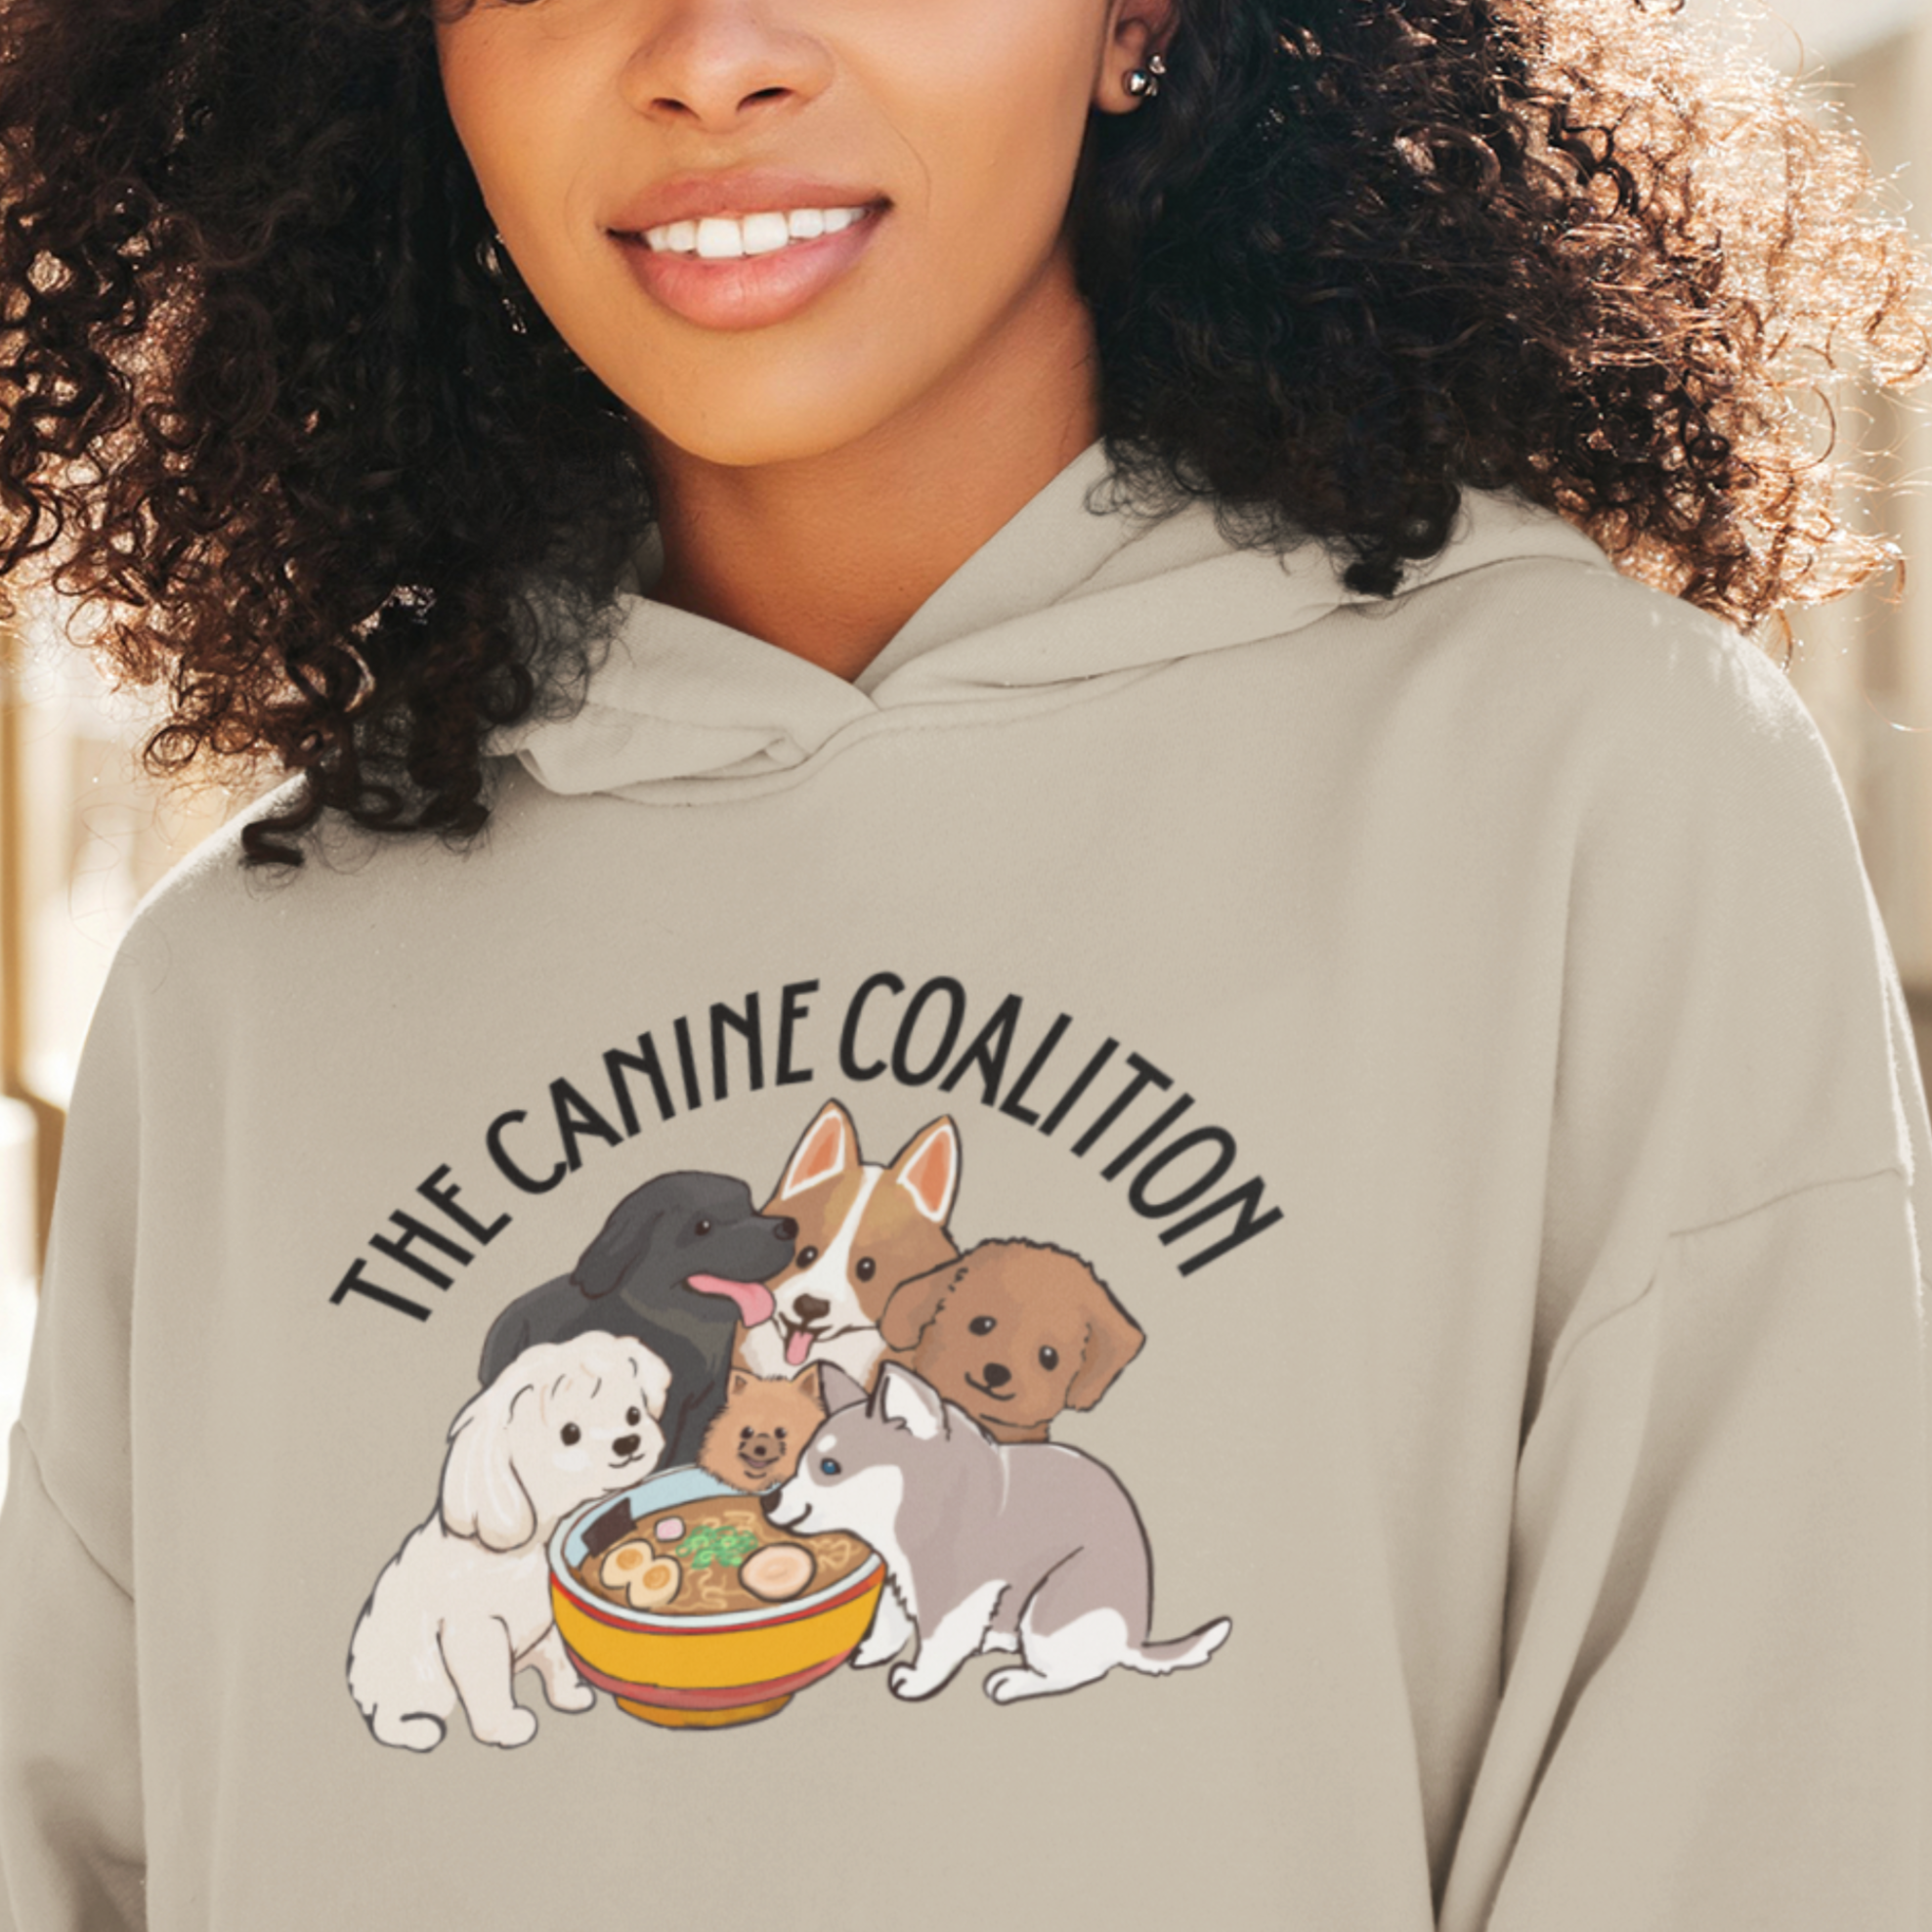 Ramen Hoodie: Canine Coalition Edition - Foodie and Pun Hoodie with Adorable Ramen Art and Asian-Inspired Design